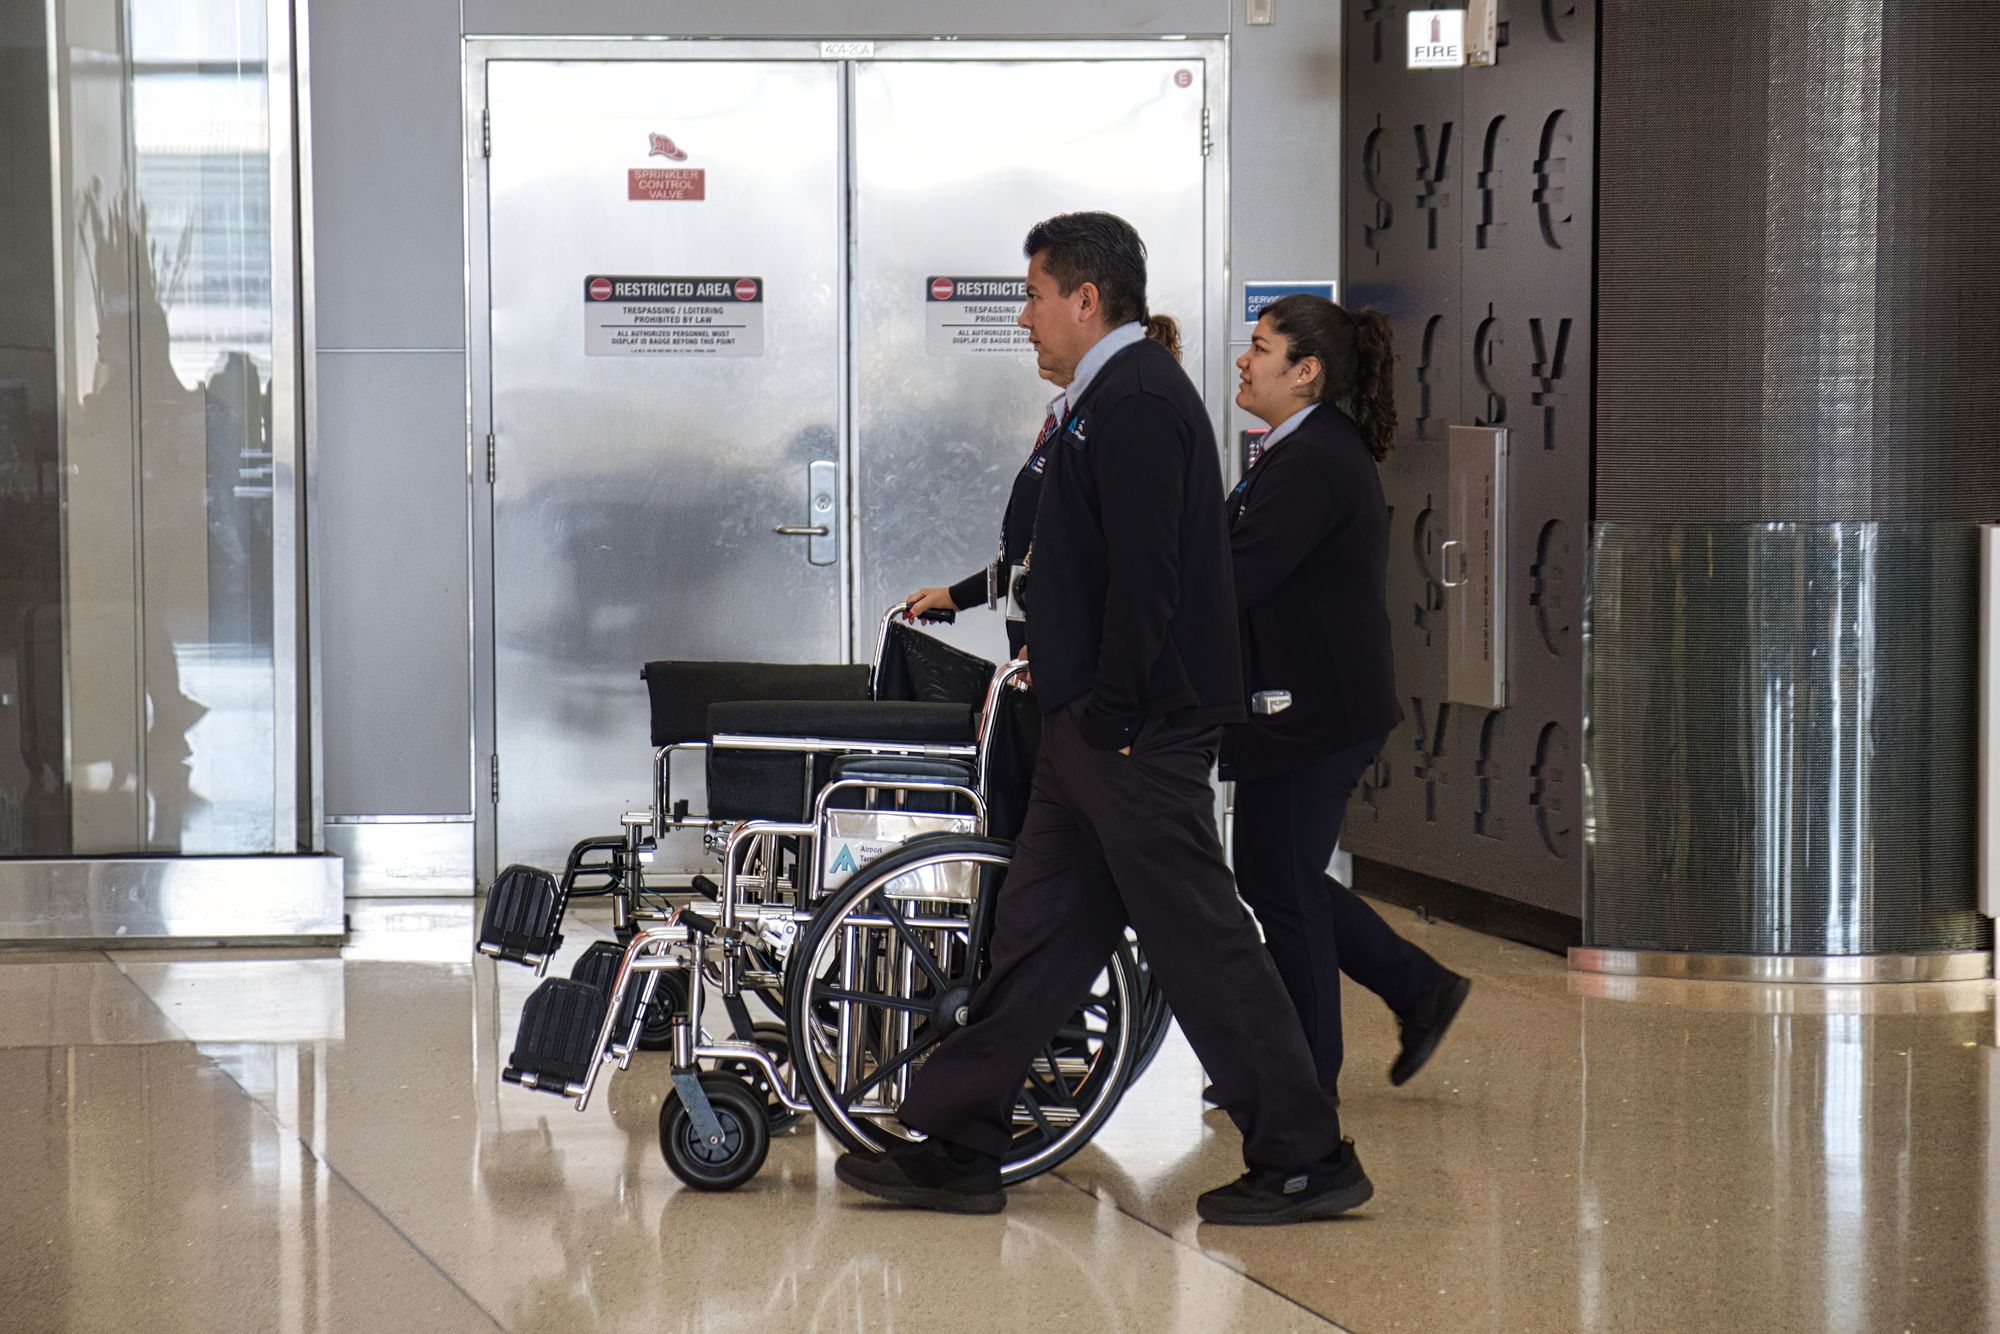 Wheelchair attendants assist disabled people at the airport